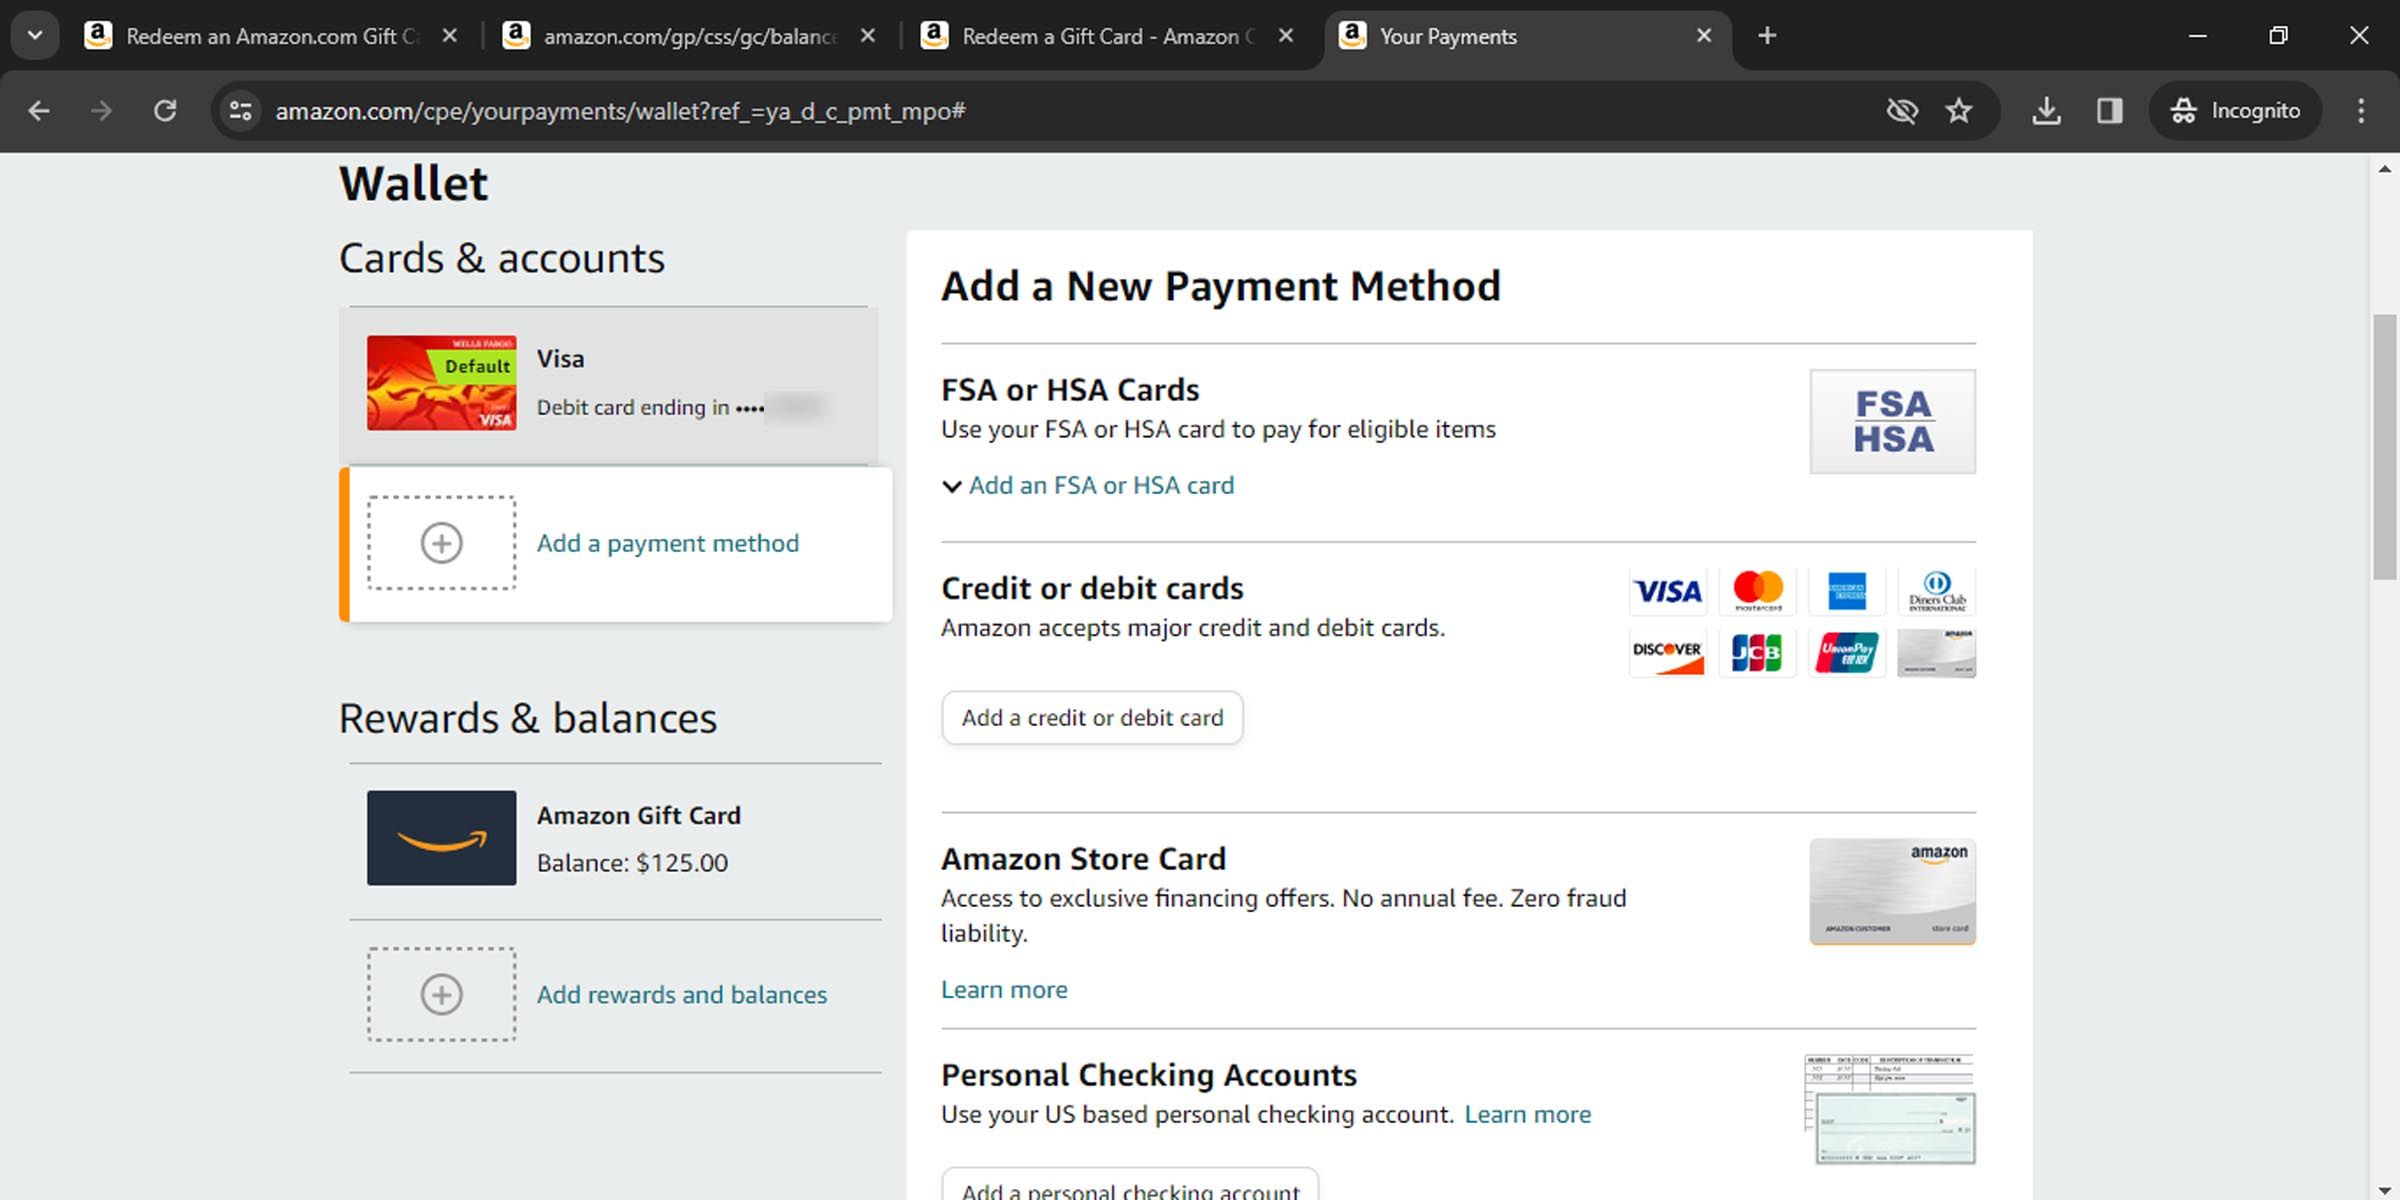 Add a payment method to your Amazon account